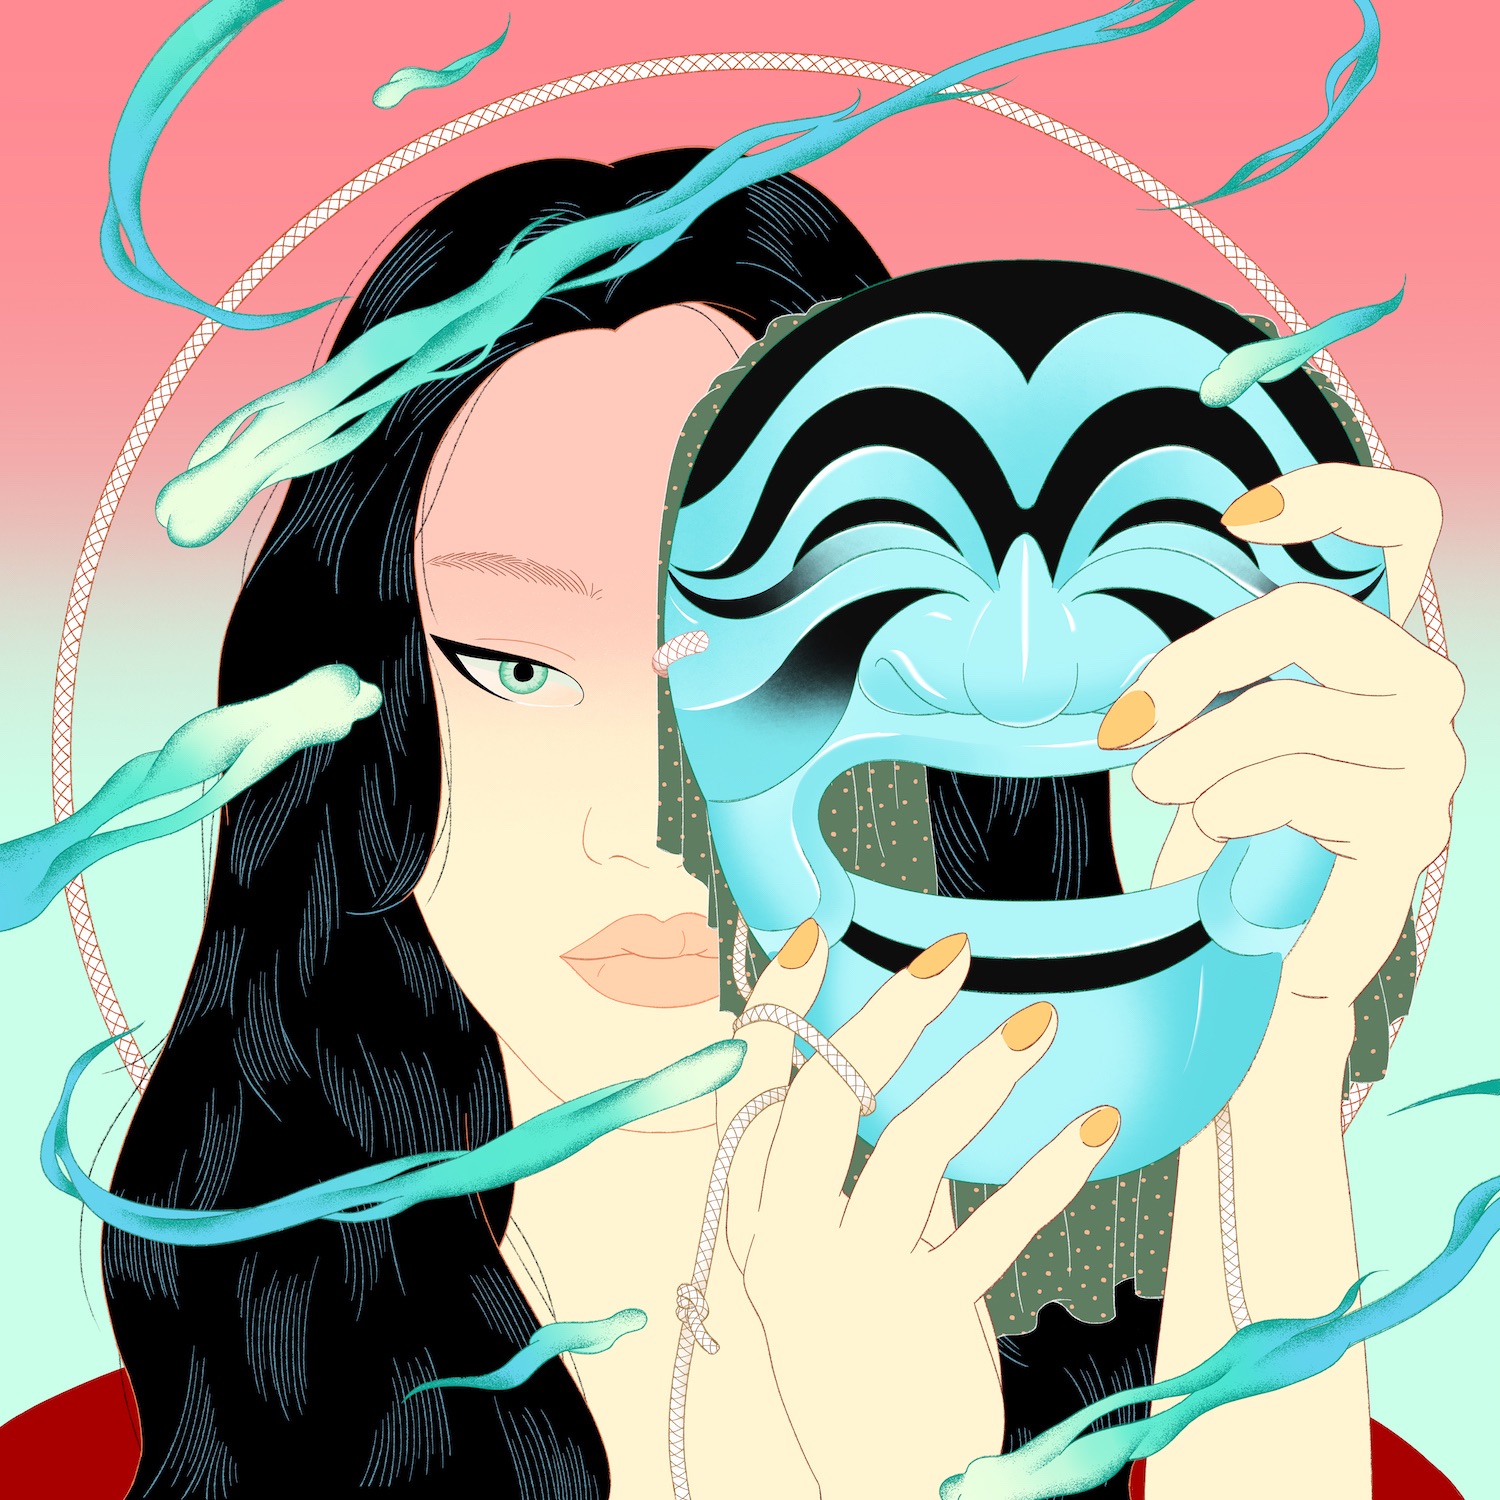 Aflaai Peggy Gou - Starry Night